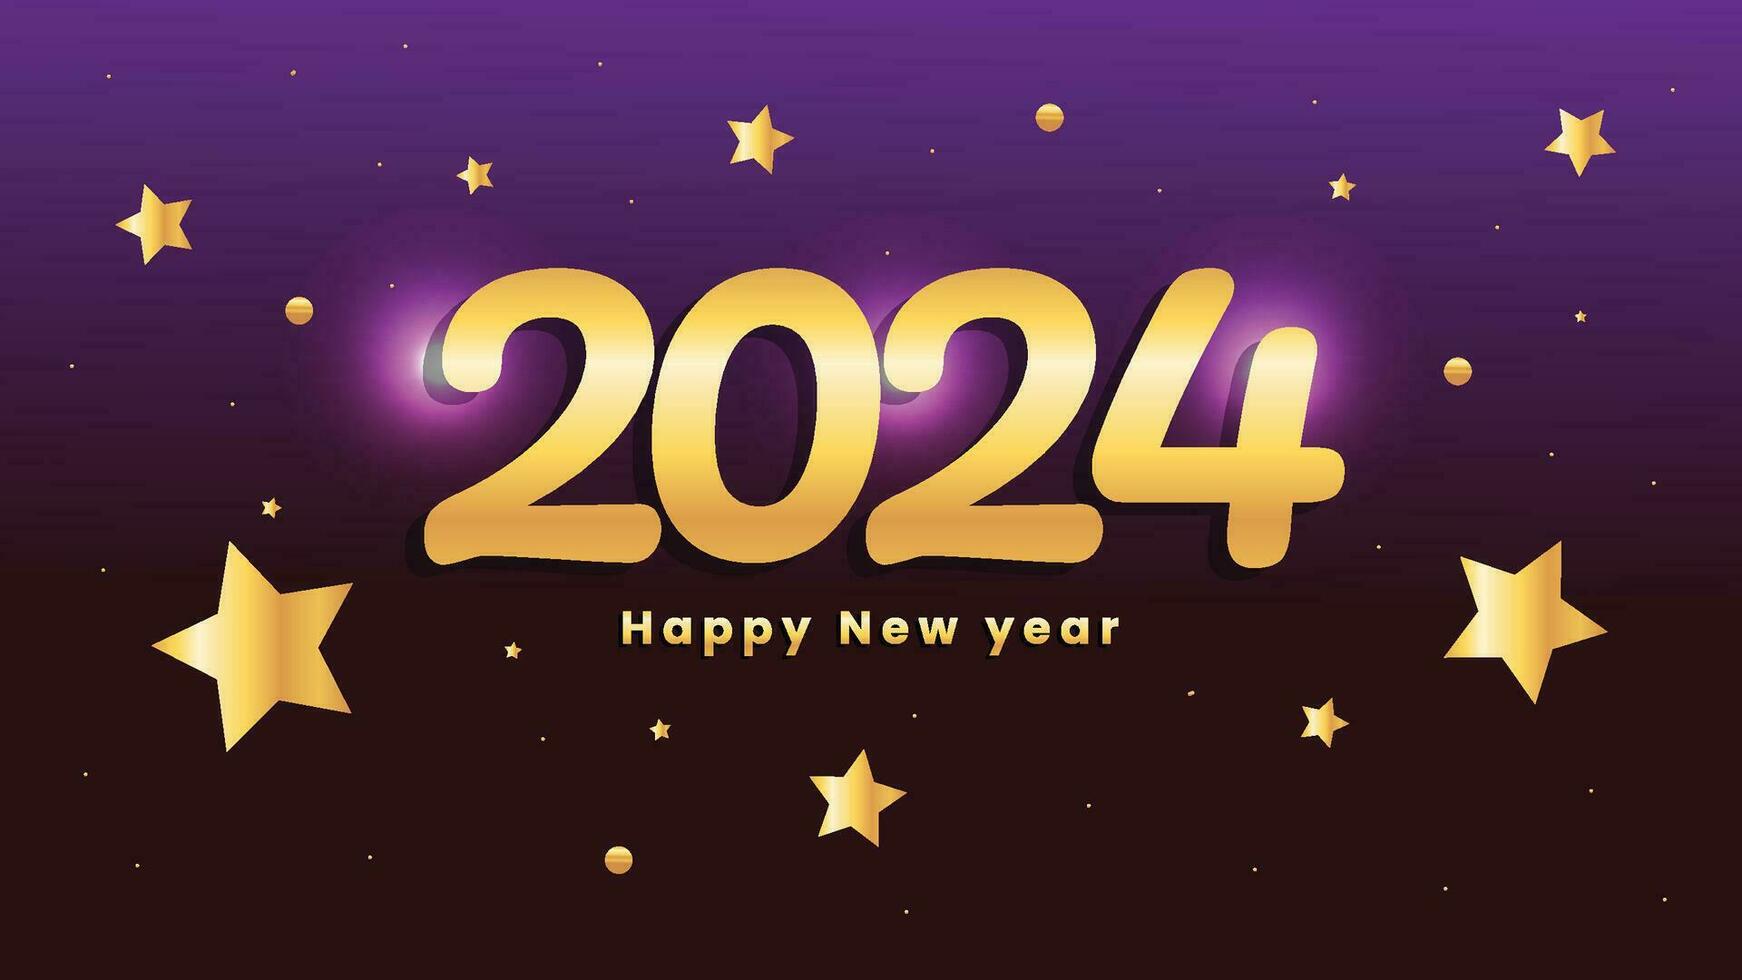 happy new year 2024 background design template free vector